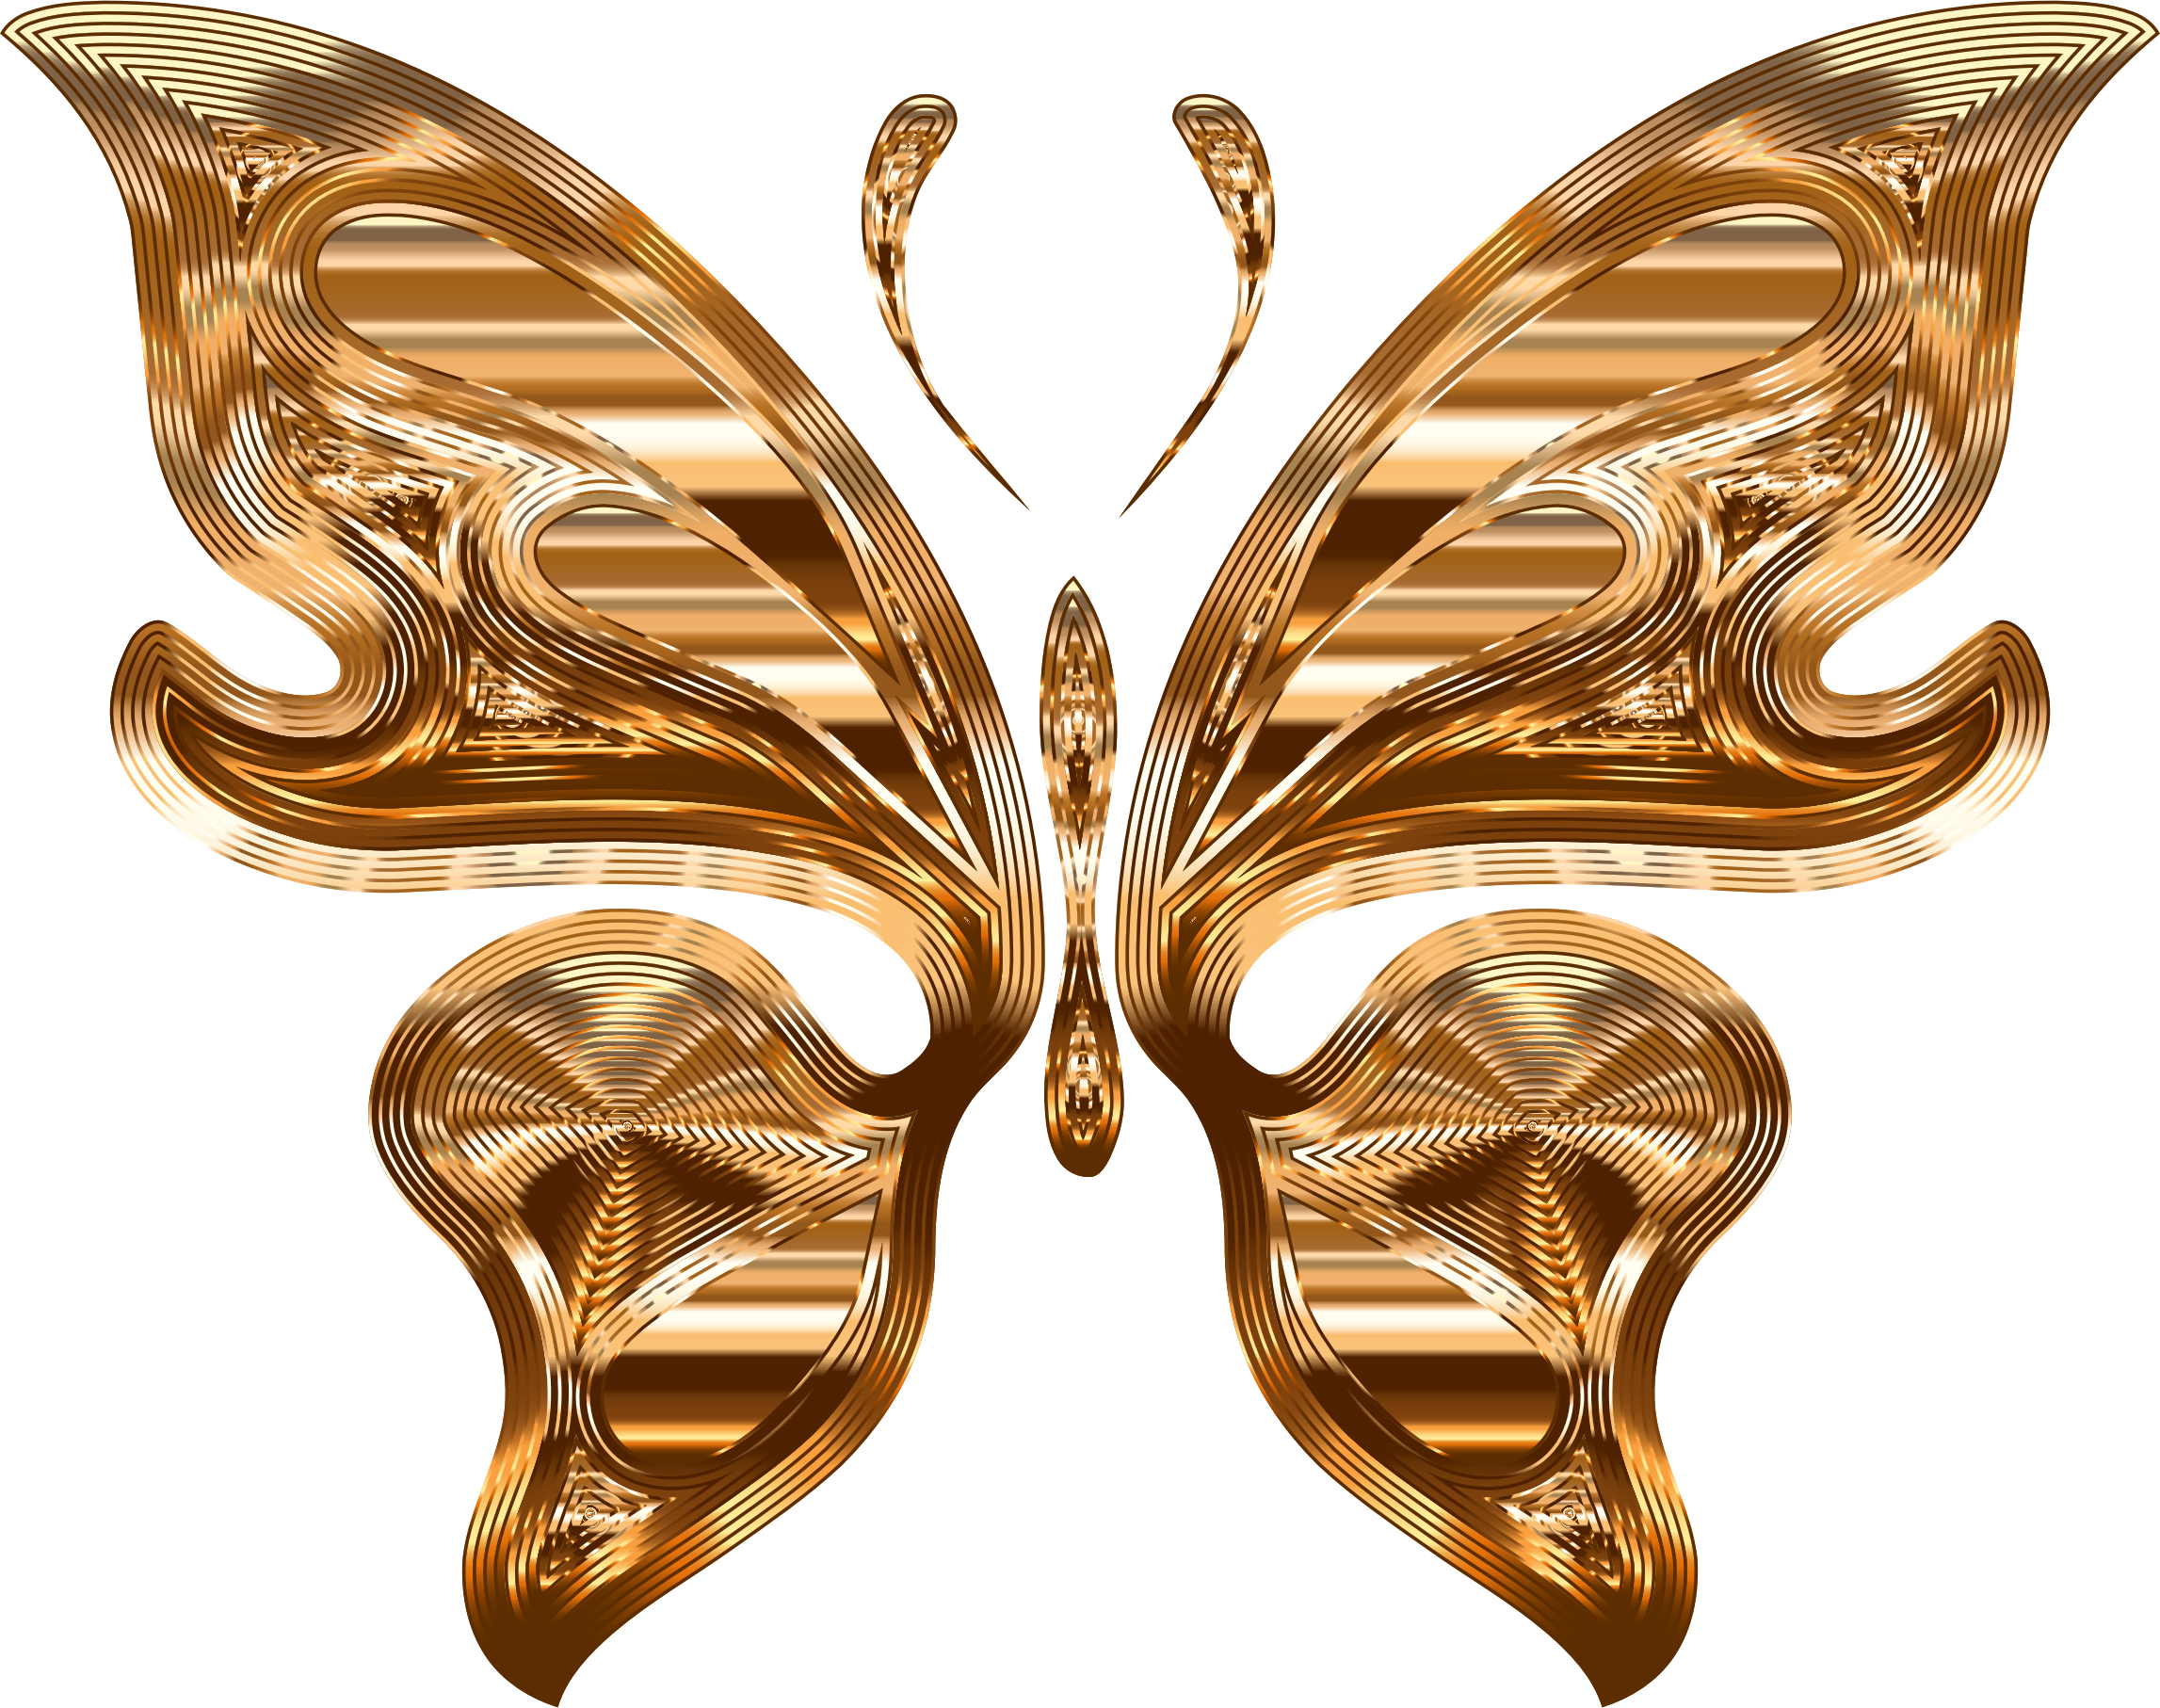 This Free Icons Png Design Of Prismatic Butterfly 10 - Gold Butterfly Silhouette Background (2294x1814)